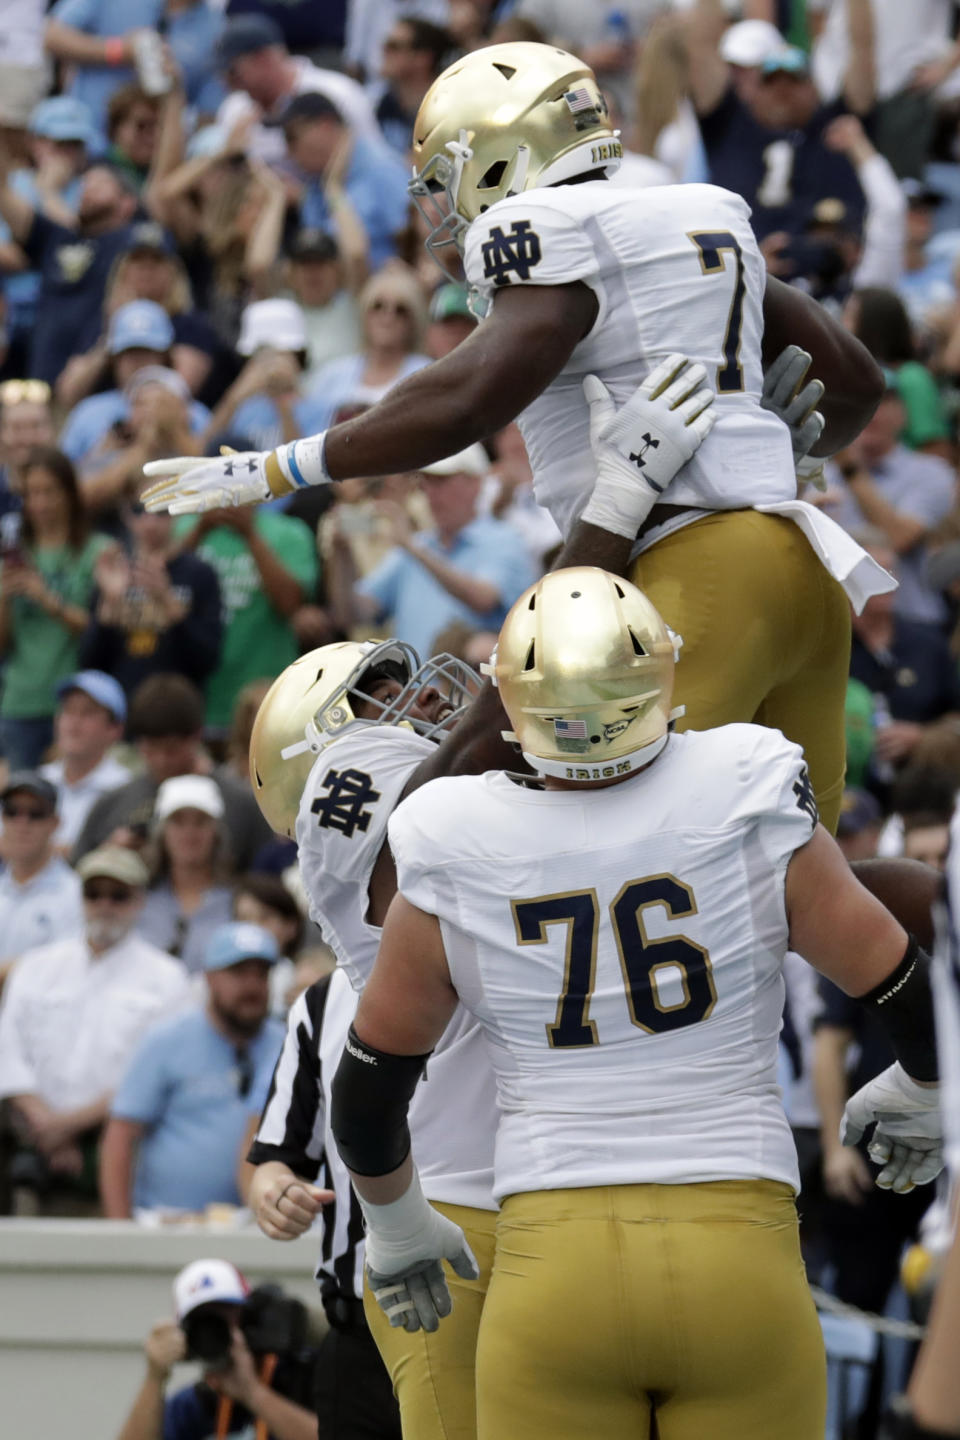 Notre Dame running back Audric Estime (7) celebrates his touchdown with Notre Dame offensive lineman Joe Alt (76) during the first half of an NCAA college football game against North Carolina in Chapel Hill, N.C., Saturday, Sept. 24, 2022 (AP Photo/Chris Seward)